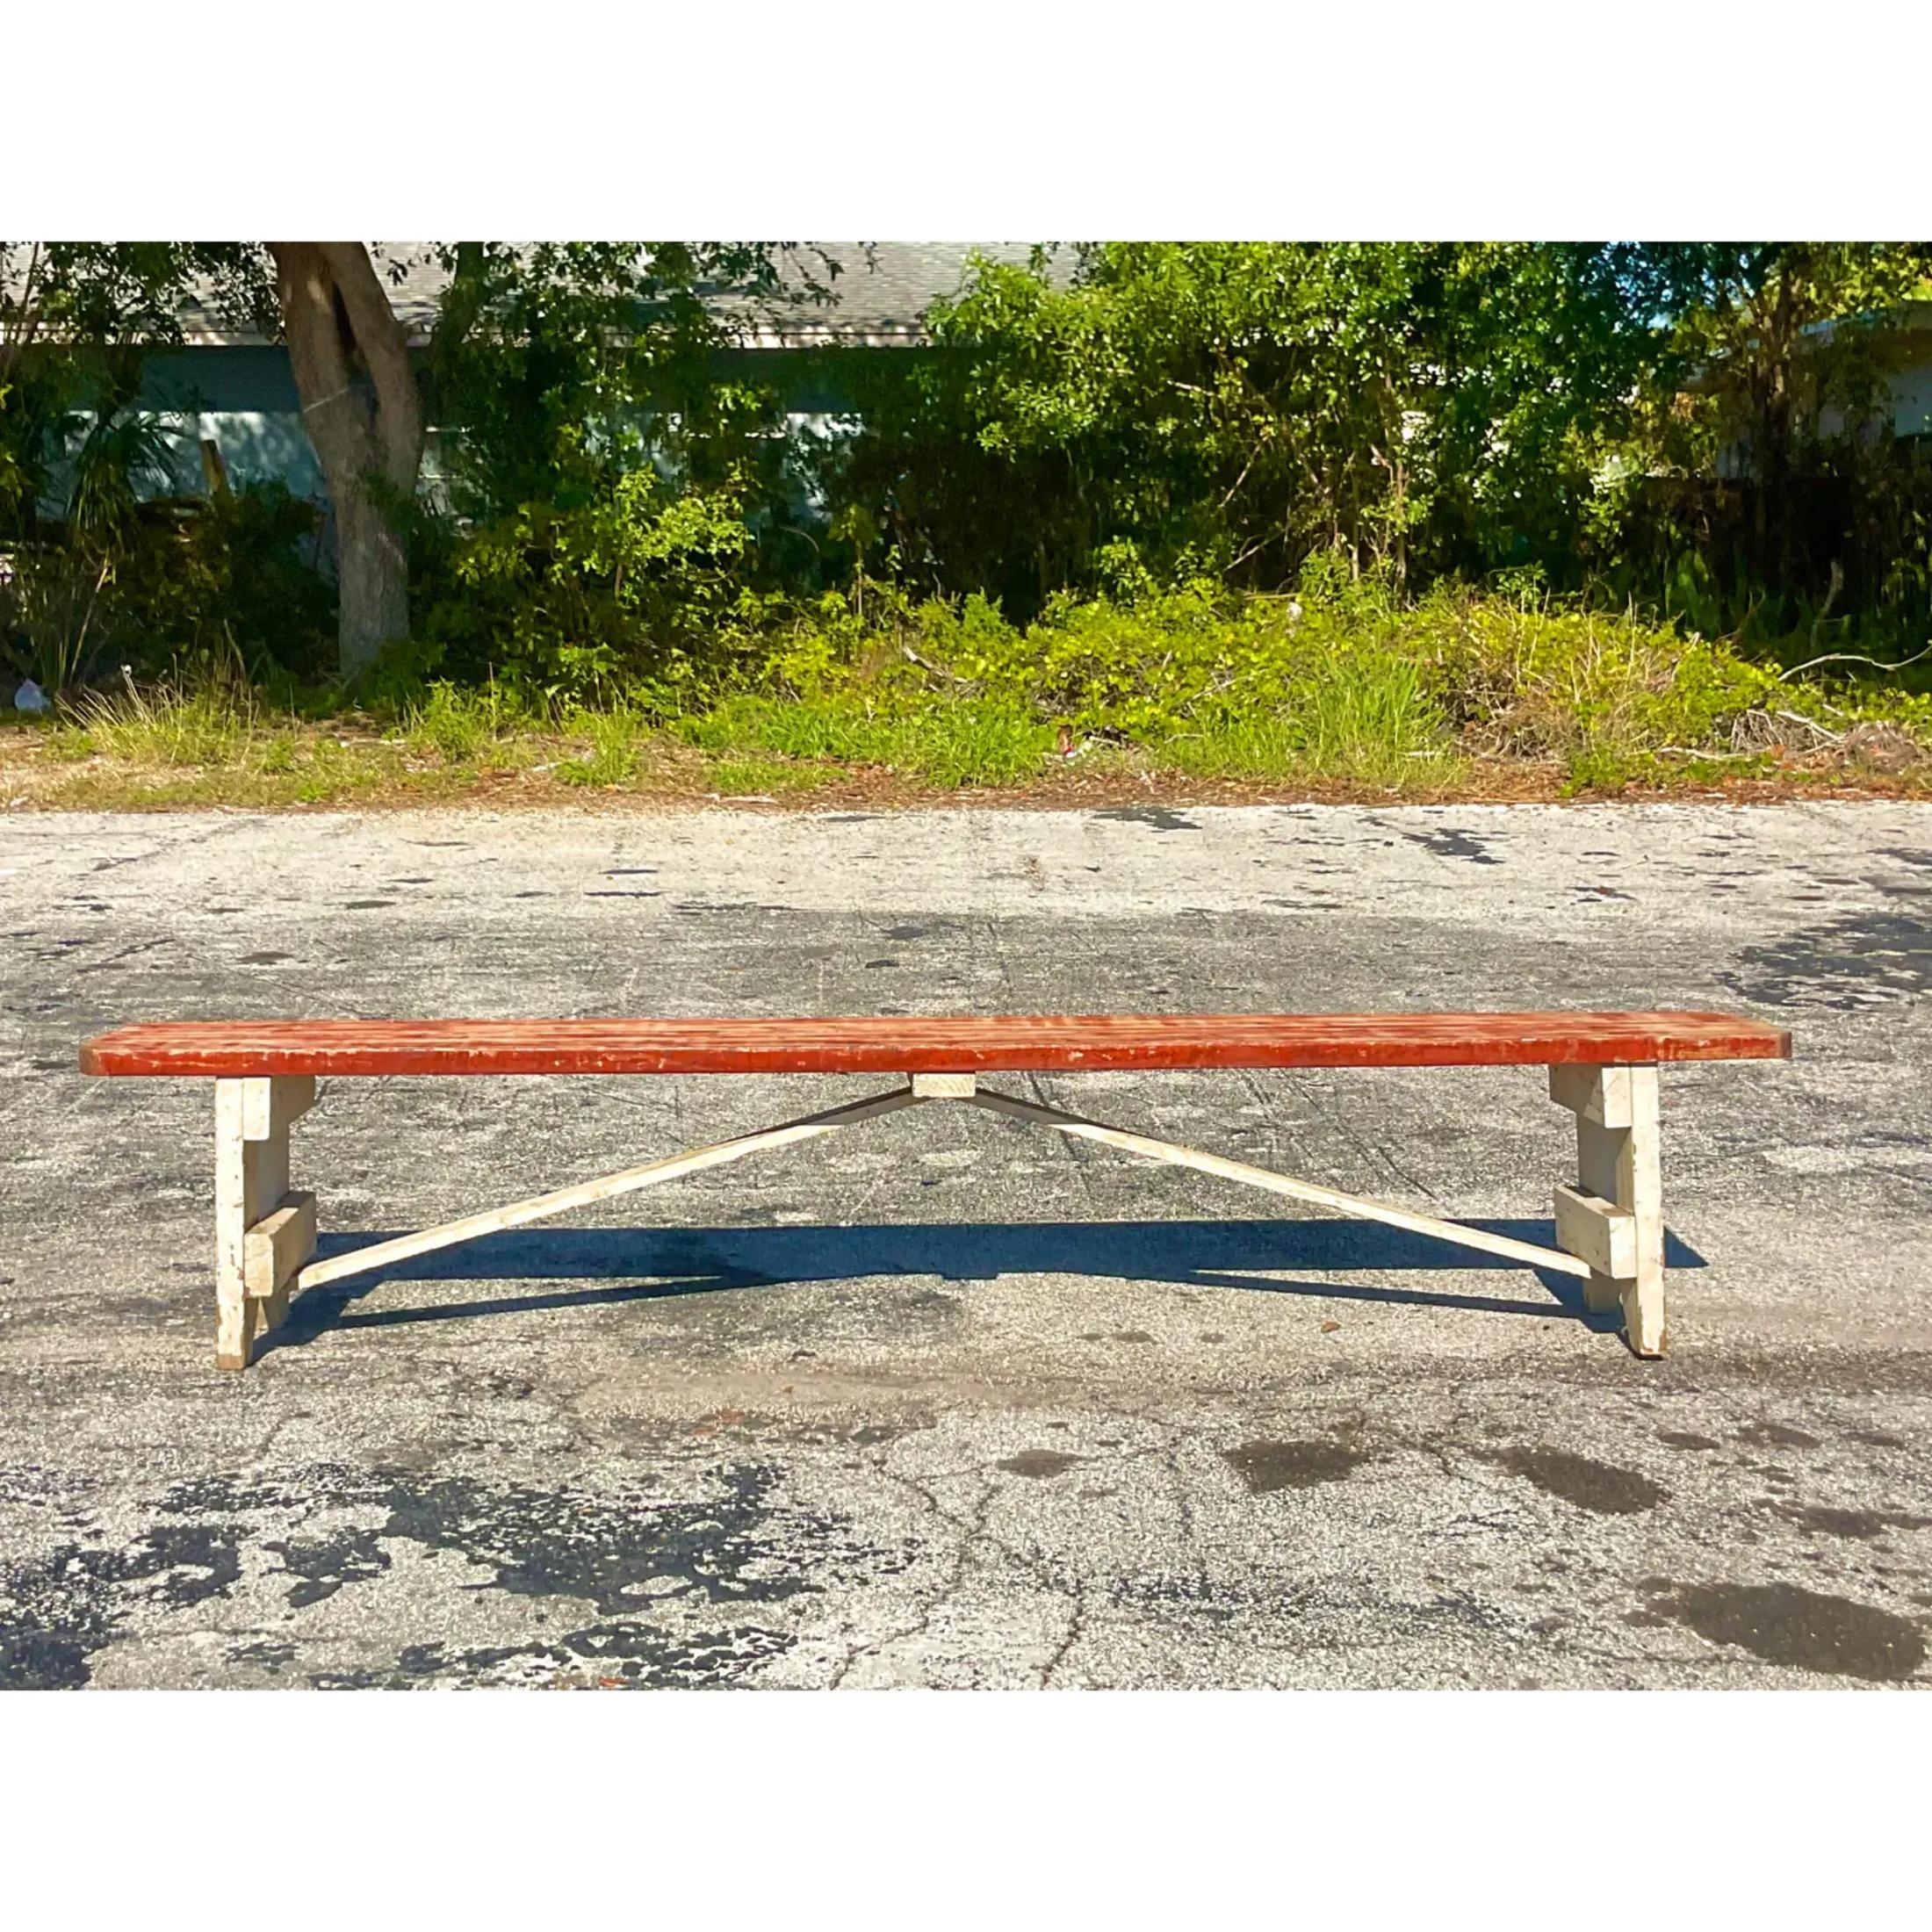 Berlin Iron Vintage Rustic Hungarian Farmhouse Bench For Sale